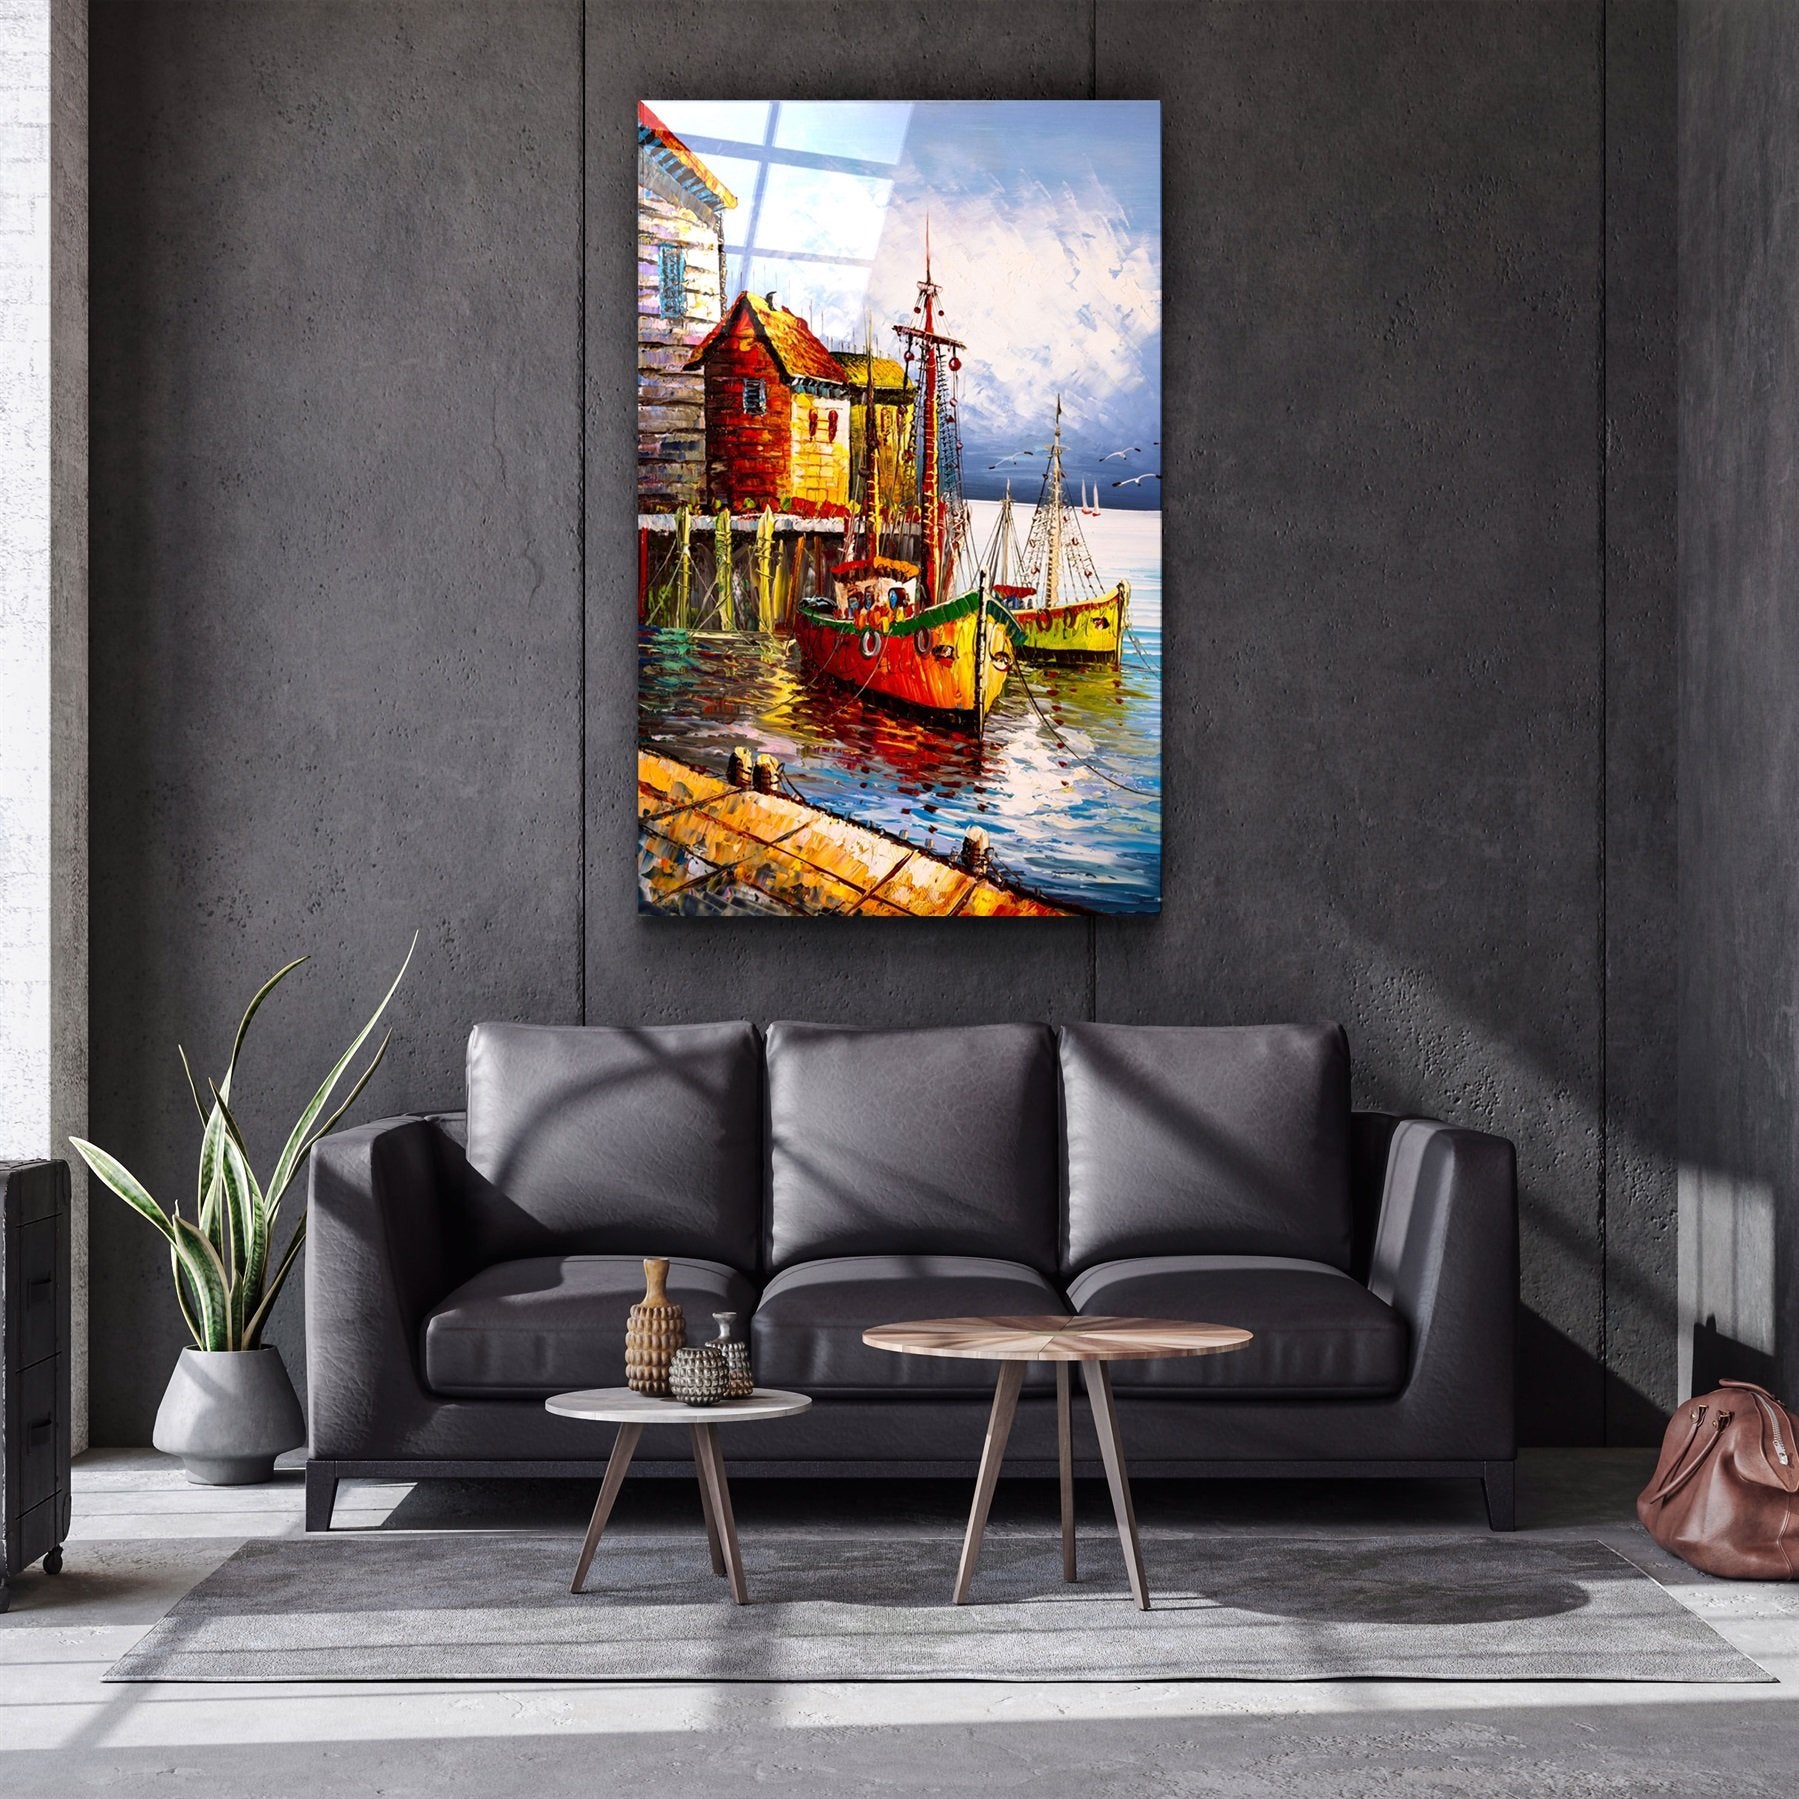 ・"Boats and Houses"・Glass Wall Art